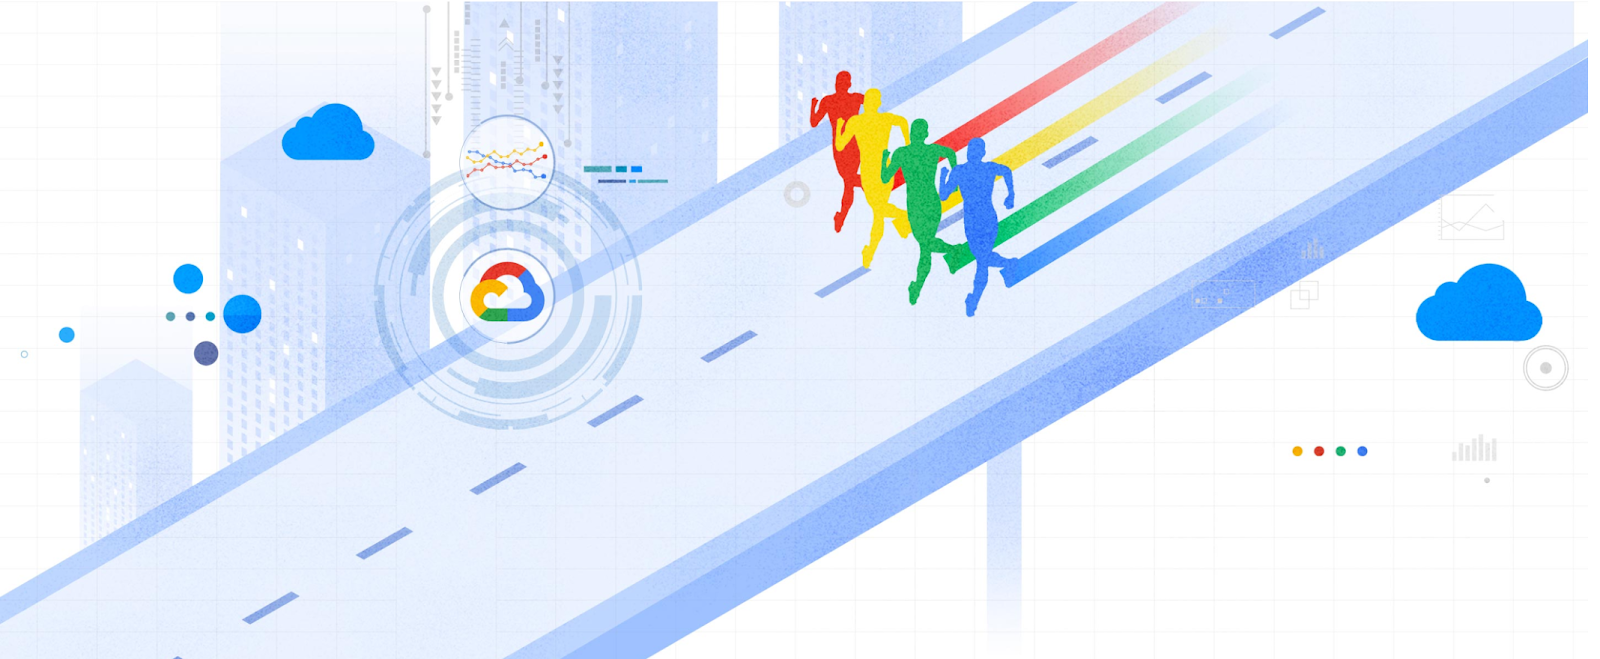 Cloud Run for Anthos Google Anthos generally available google cloud next hybrid multicloud